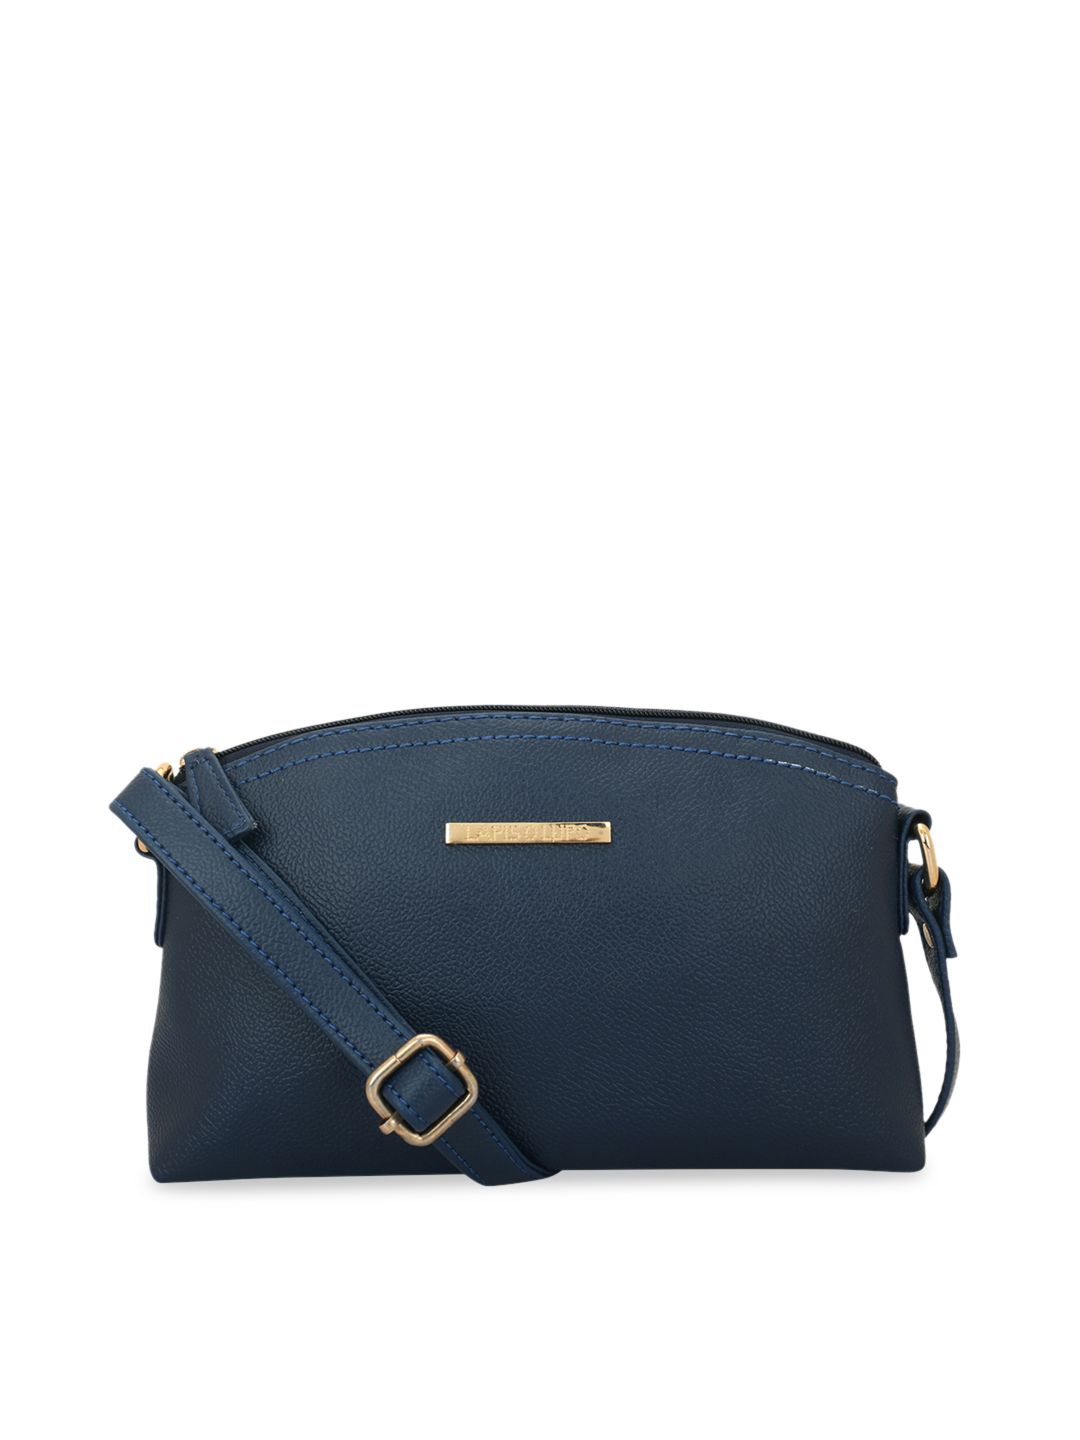 Lapis O Lupo Navy Blue Solid Sling Bag Price in India